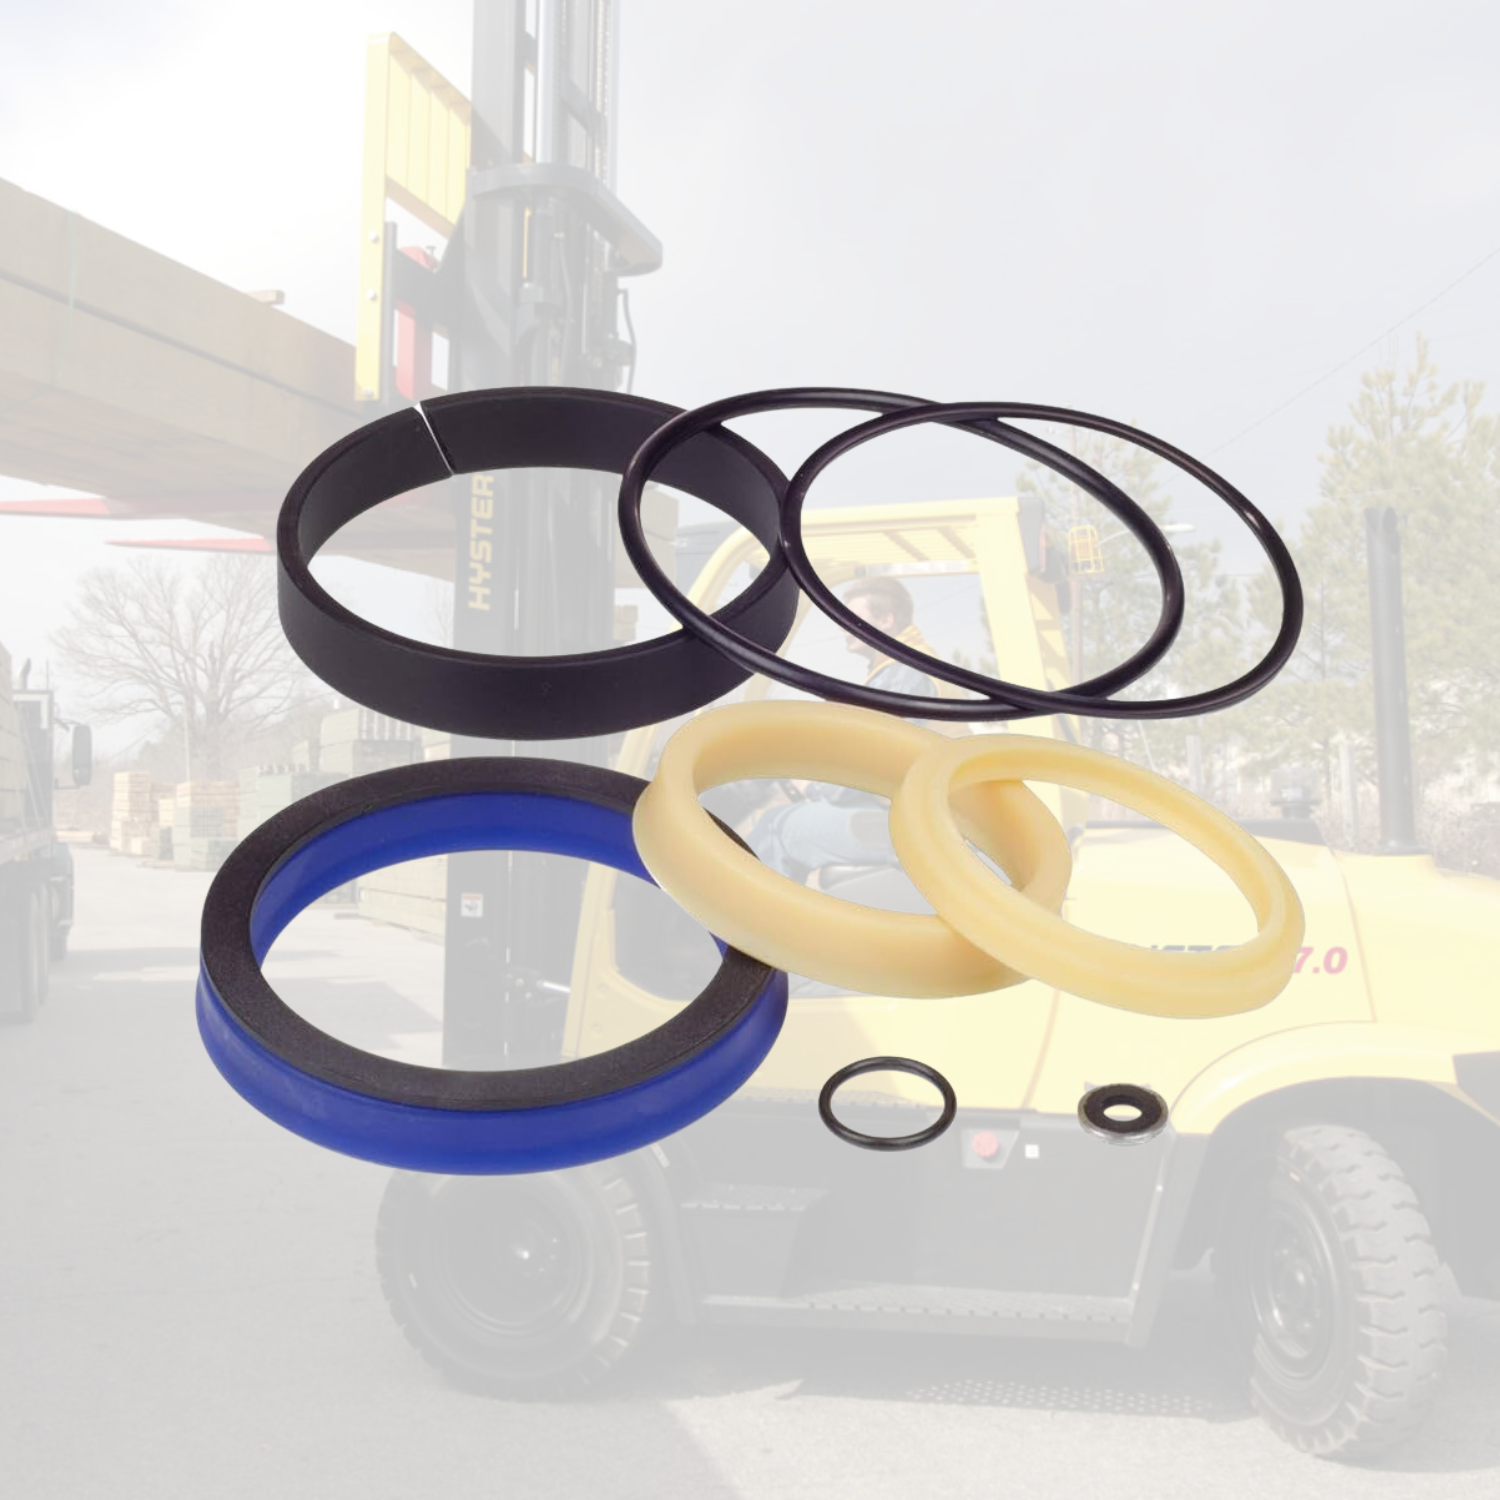 Hyster seal kits in stock now